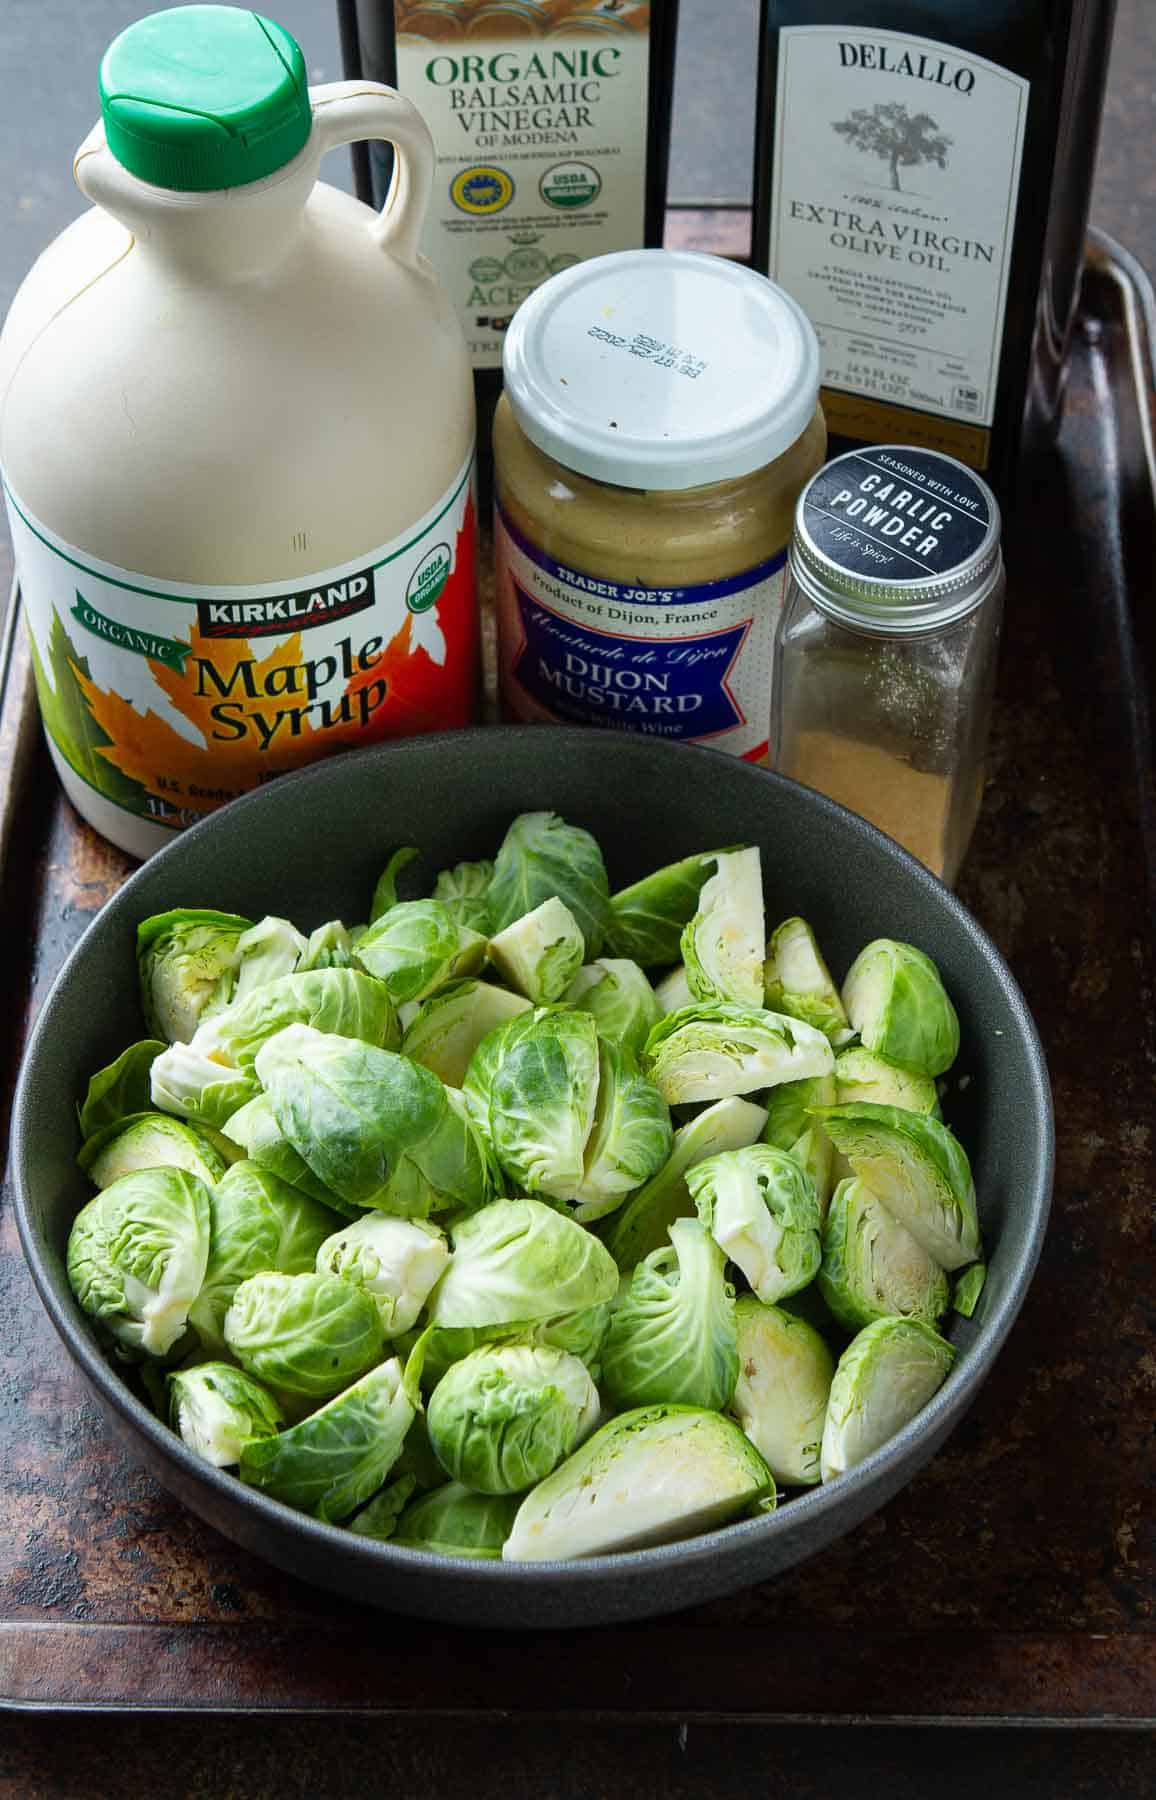 Brussels sprouts, maple syrup, Dijon mustard, garlic powder, balsamic vinegar and olive oil on a baking sheet.